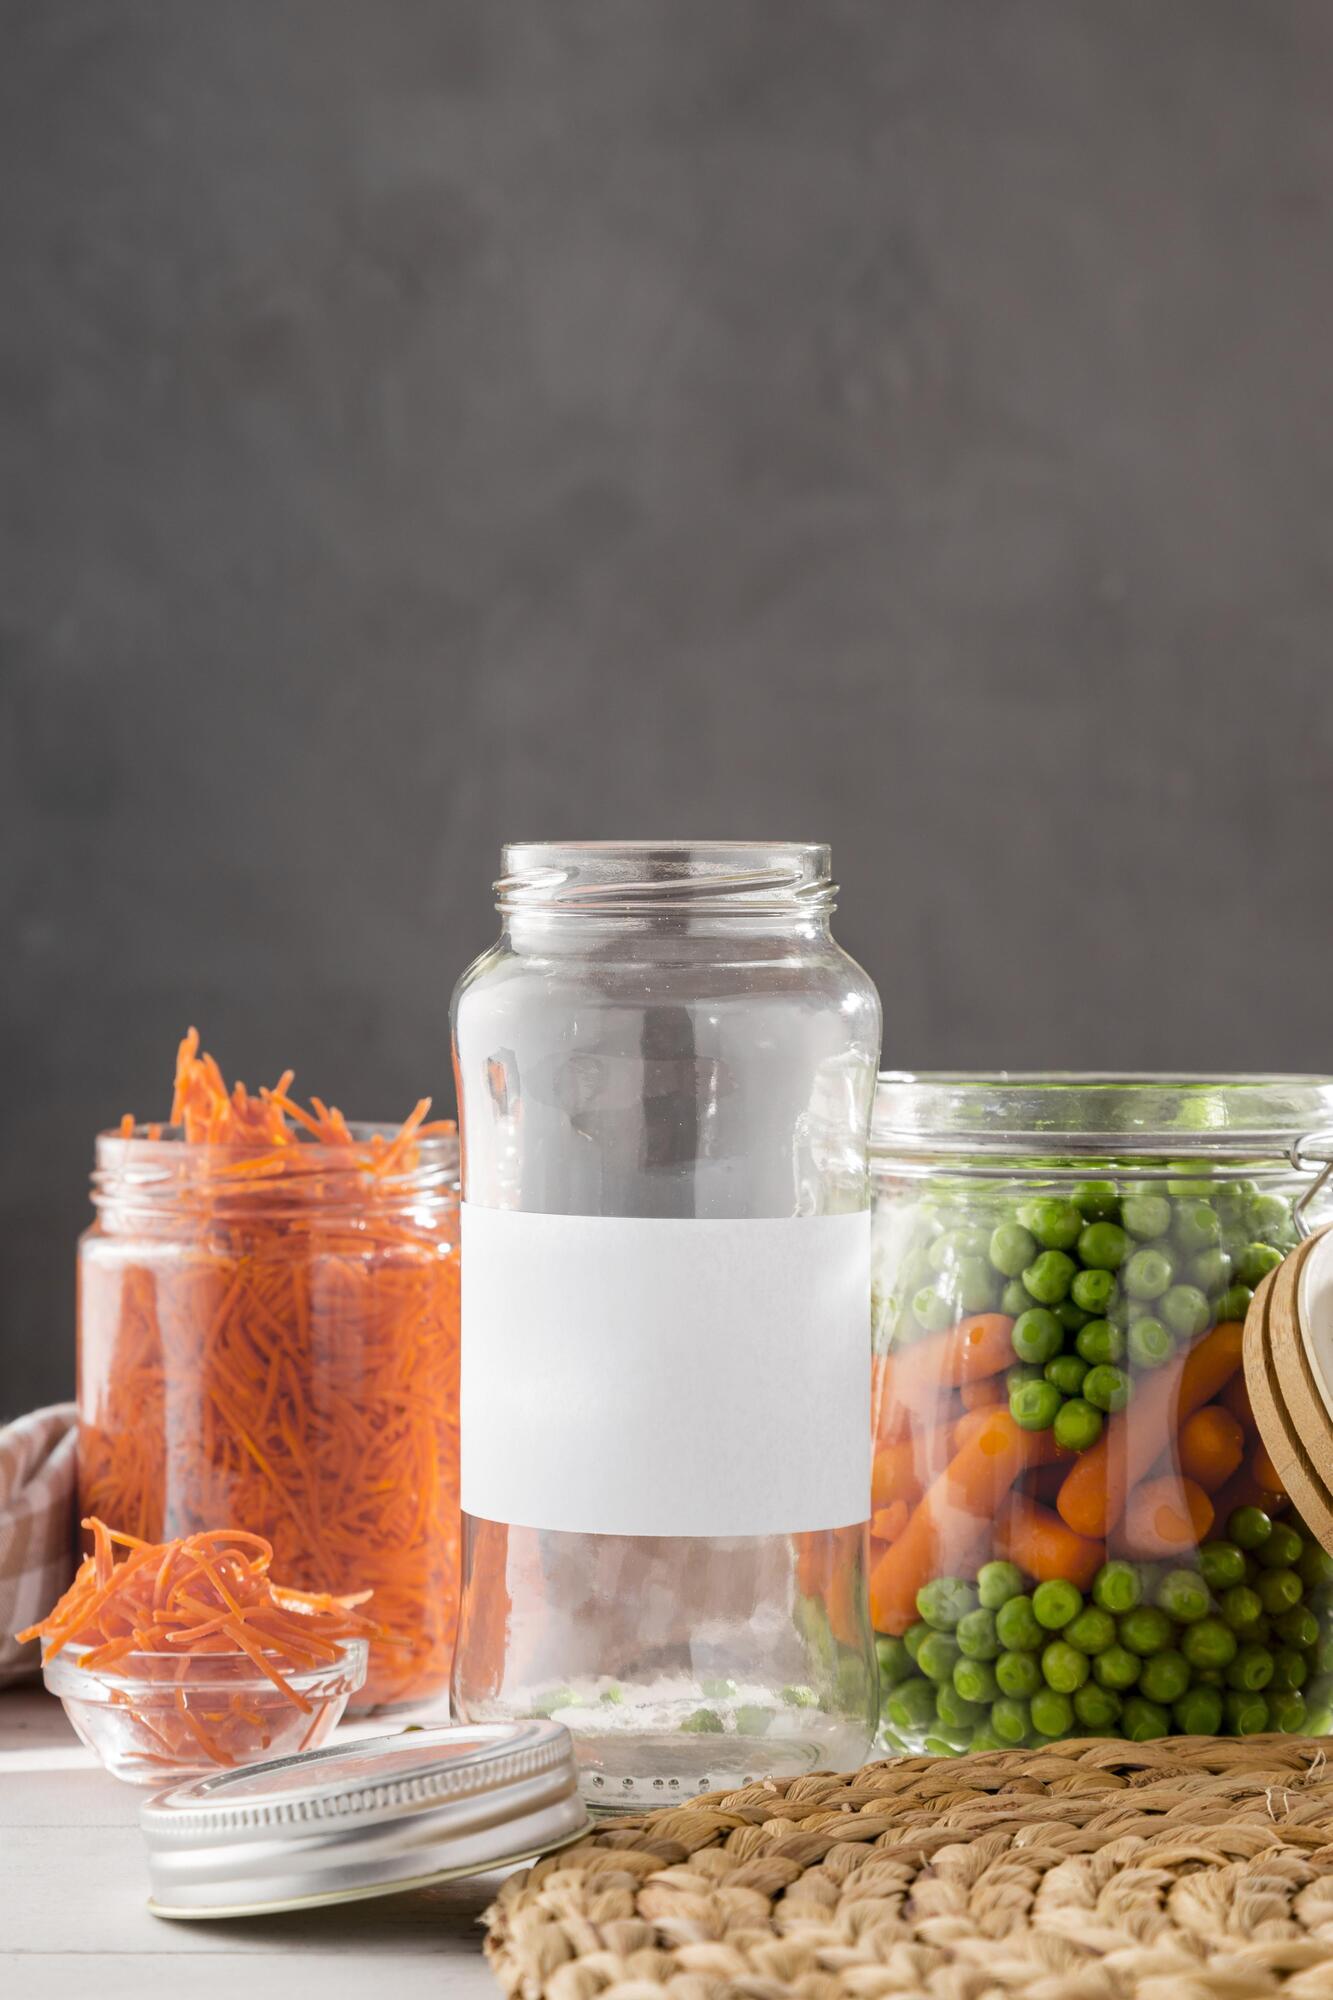 How to sterilize canning jars: step-by-step instructions